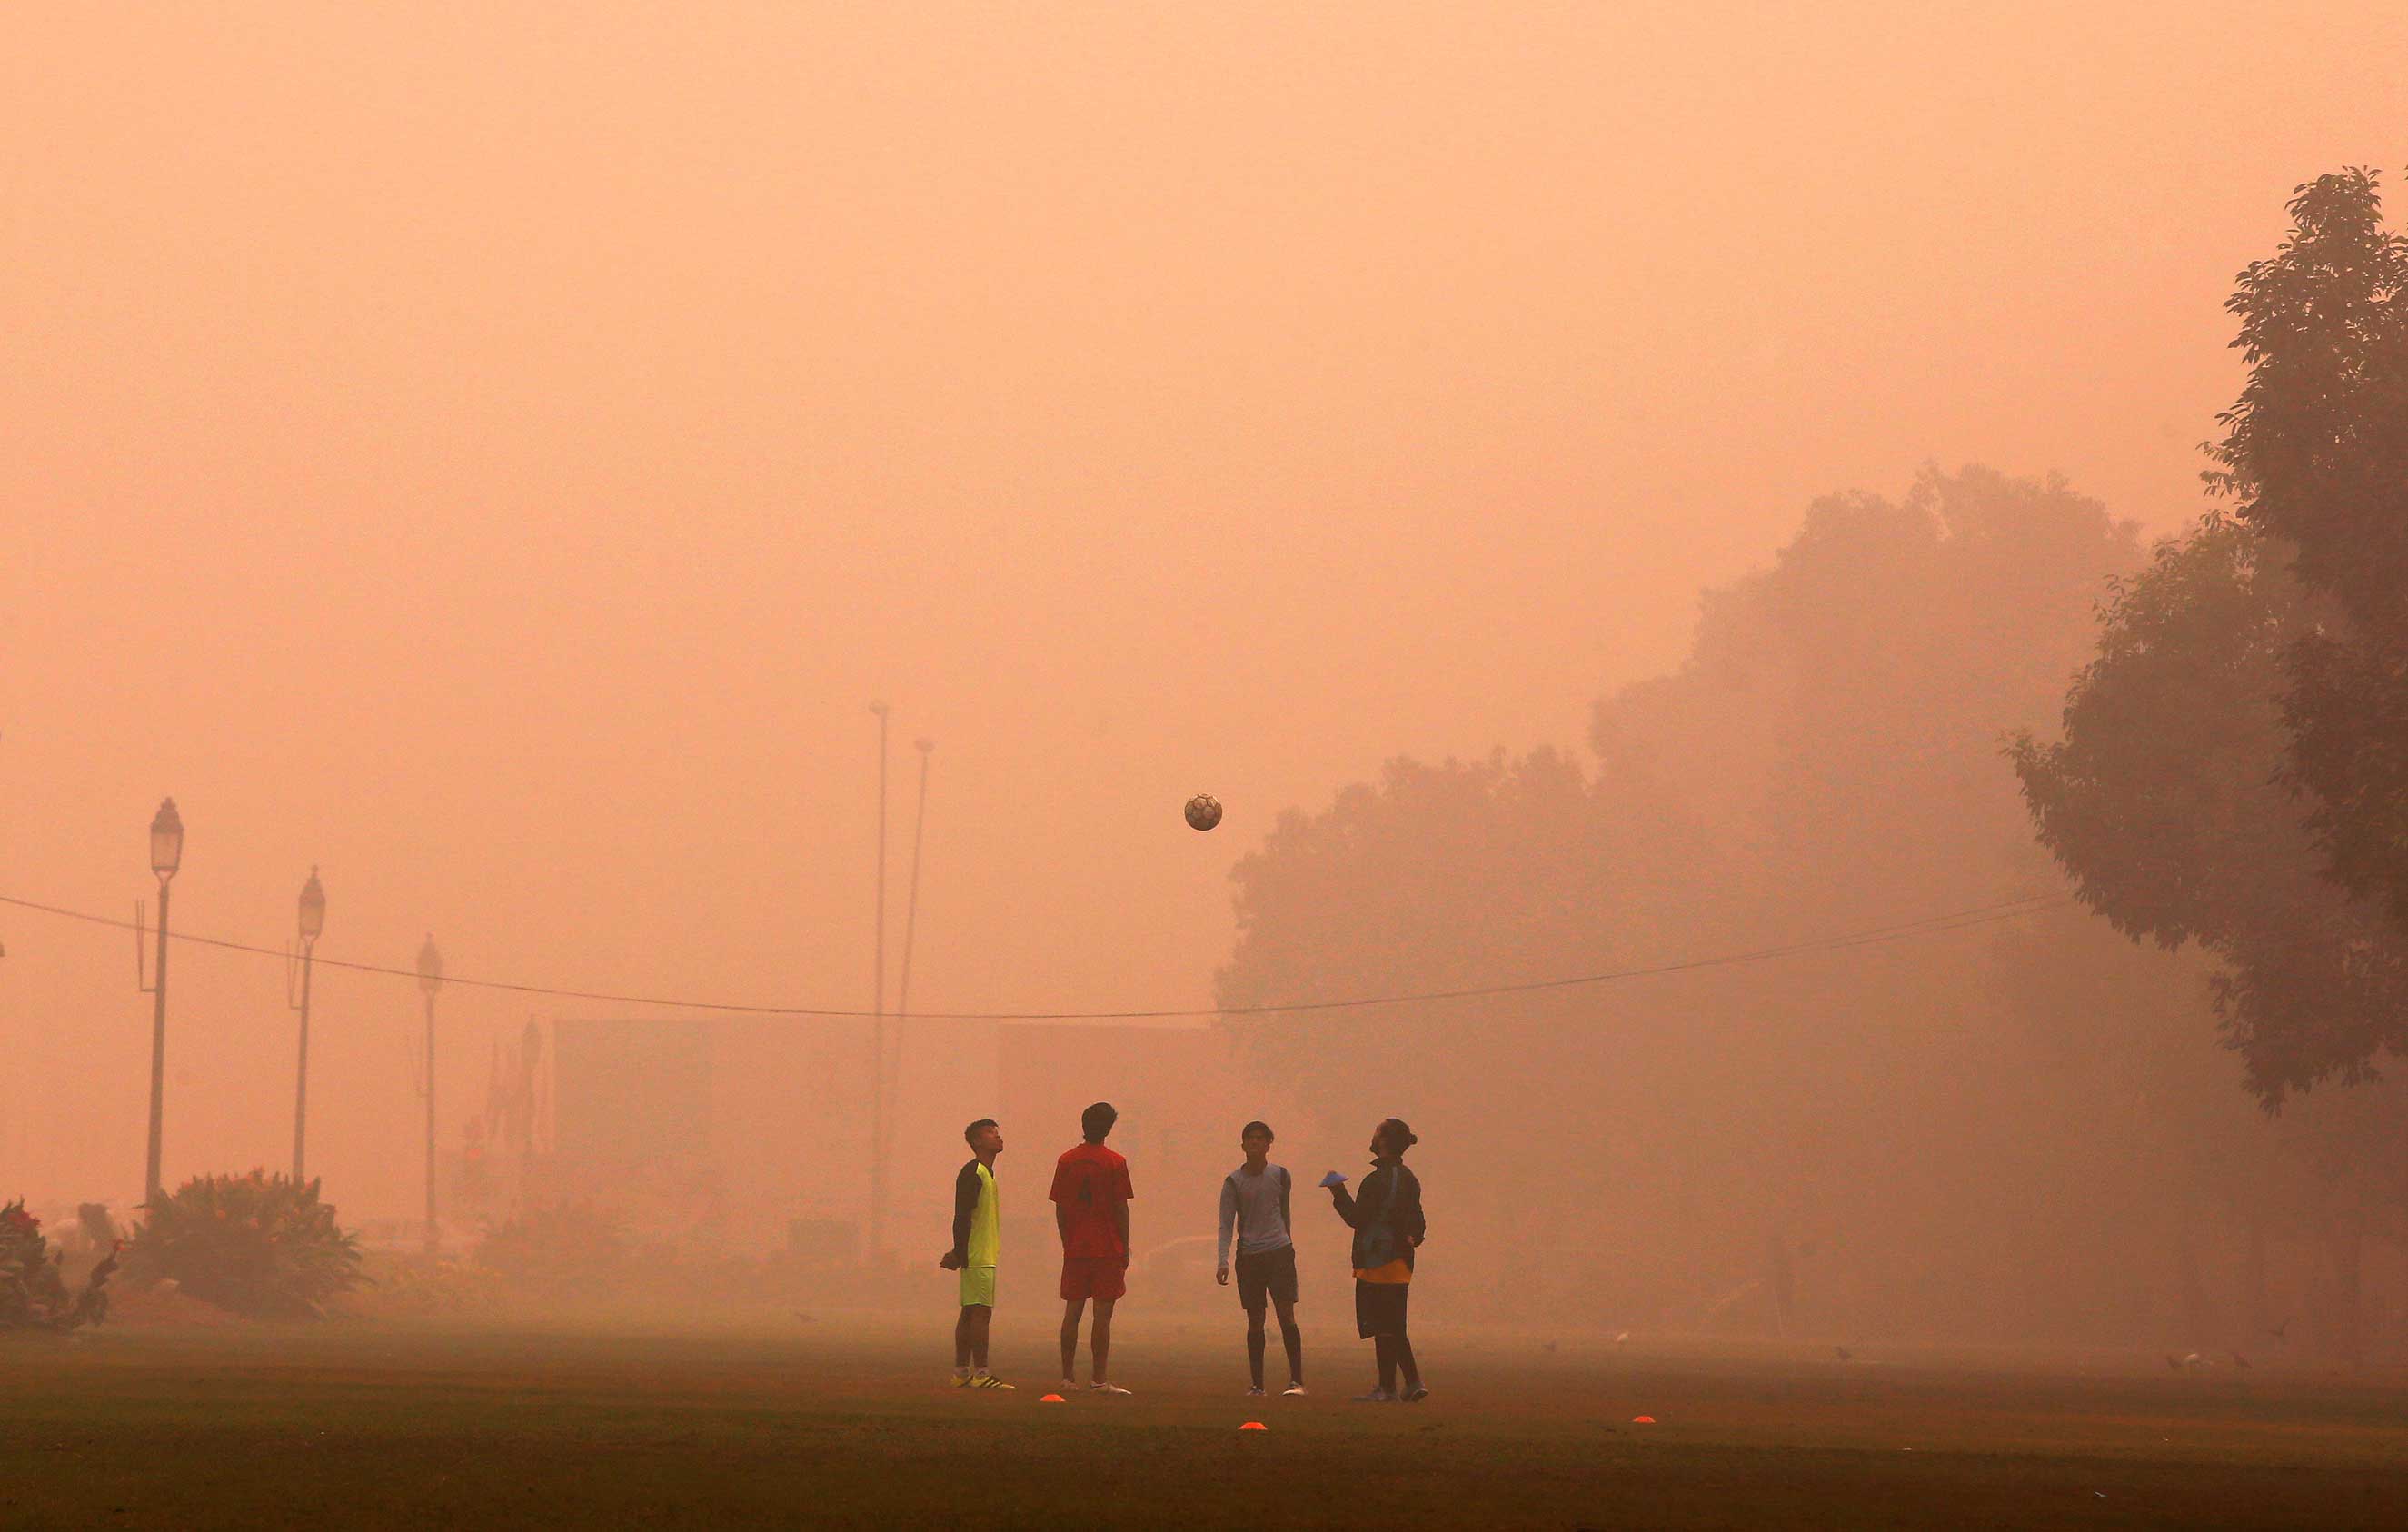 Children play on a smoggy day in New Delhi, where thousands die early from air pollution yearly (Adnan Abidi—Reuters)